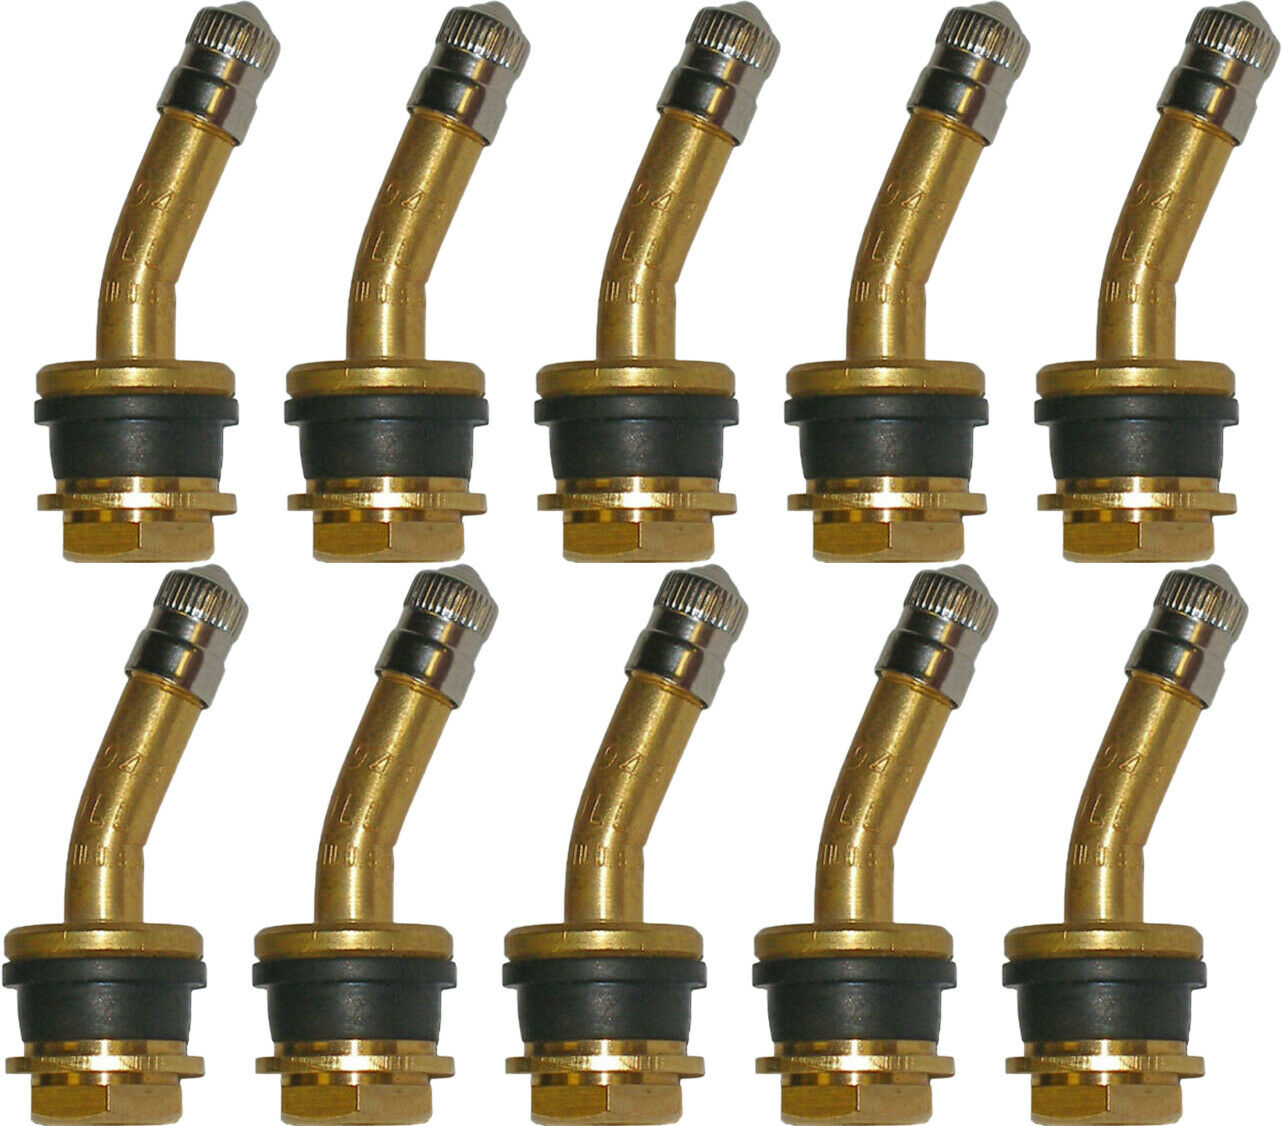 Dill VS-943 1-1/2" Brass Truck Valve Stem with 21° Bend Pack of 10